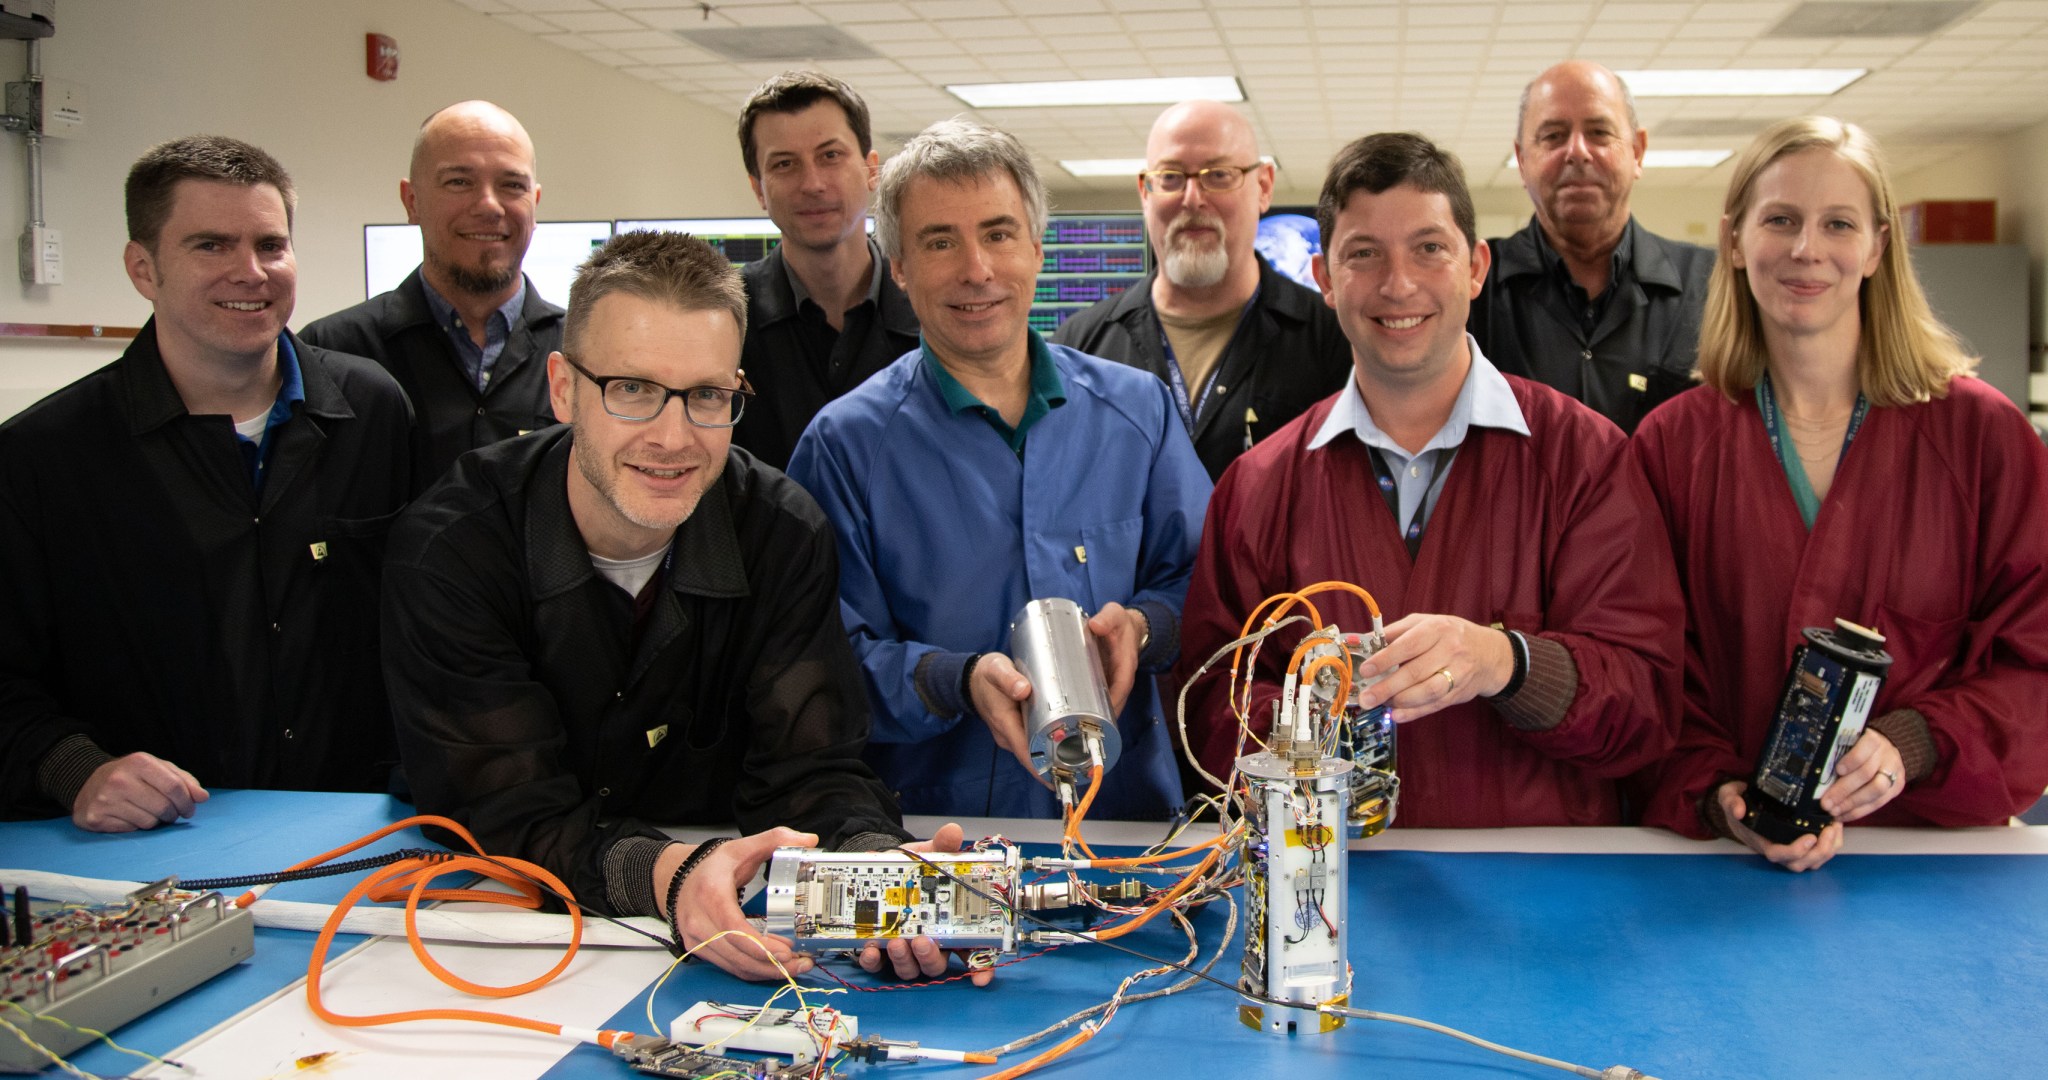 Group photo of nine smiling people, with some of those in the front row holding small, silvery cylinders (each a bit larger than a soda can) bespangled with circuitry; coils of wire spill out from some of the canisters.